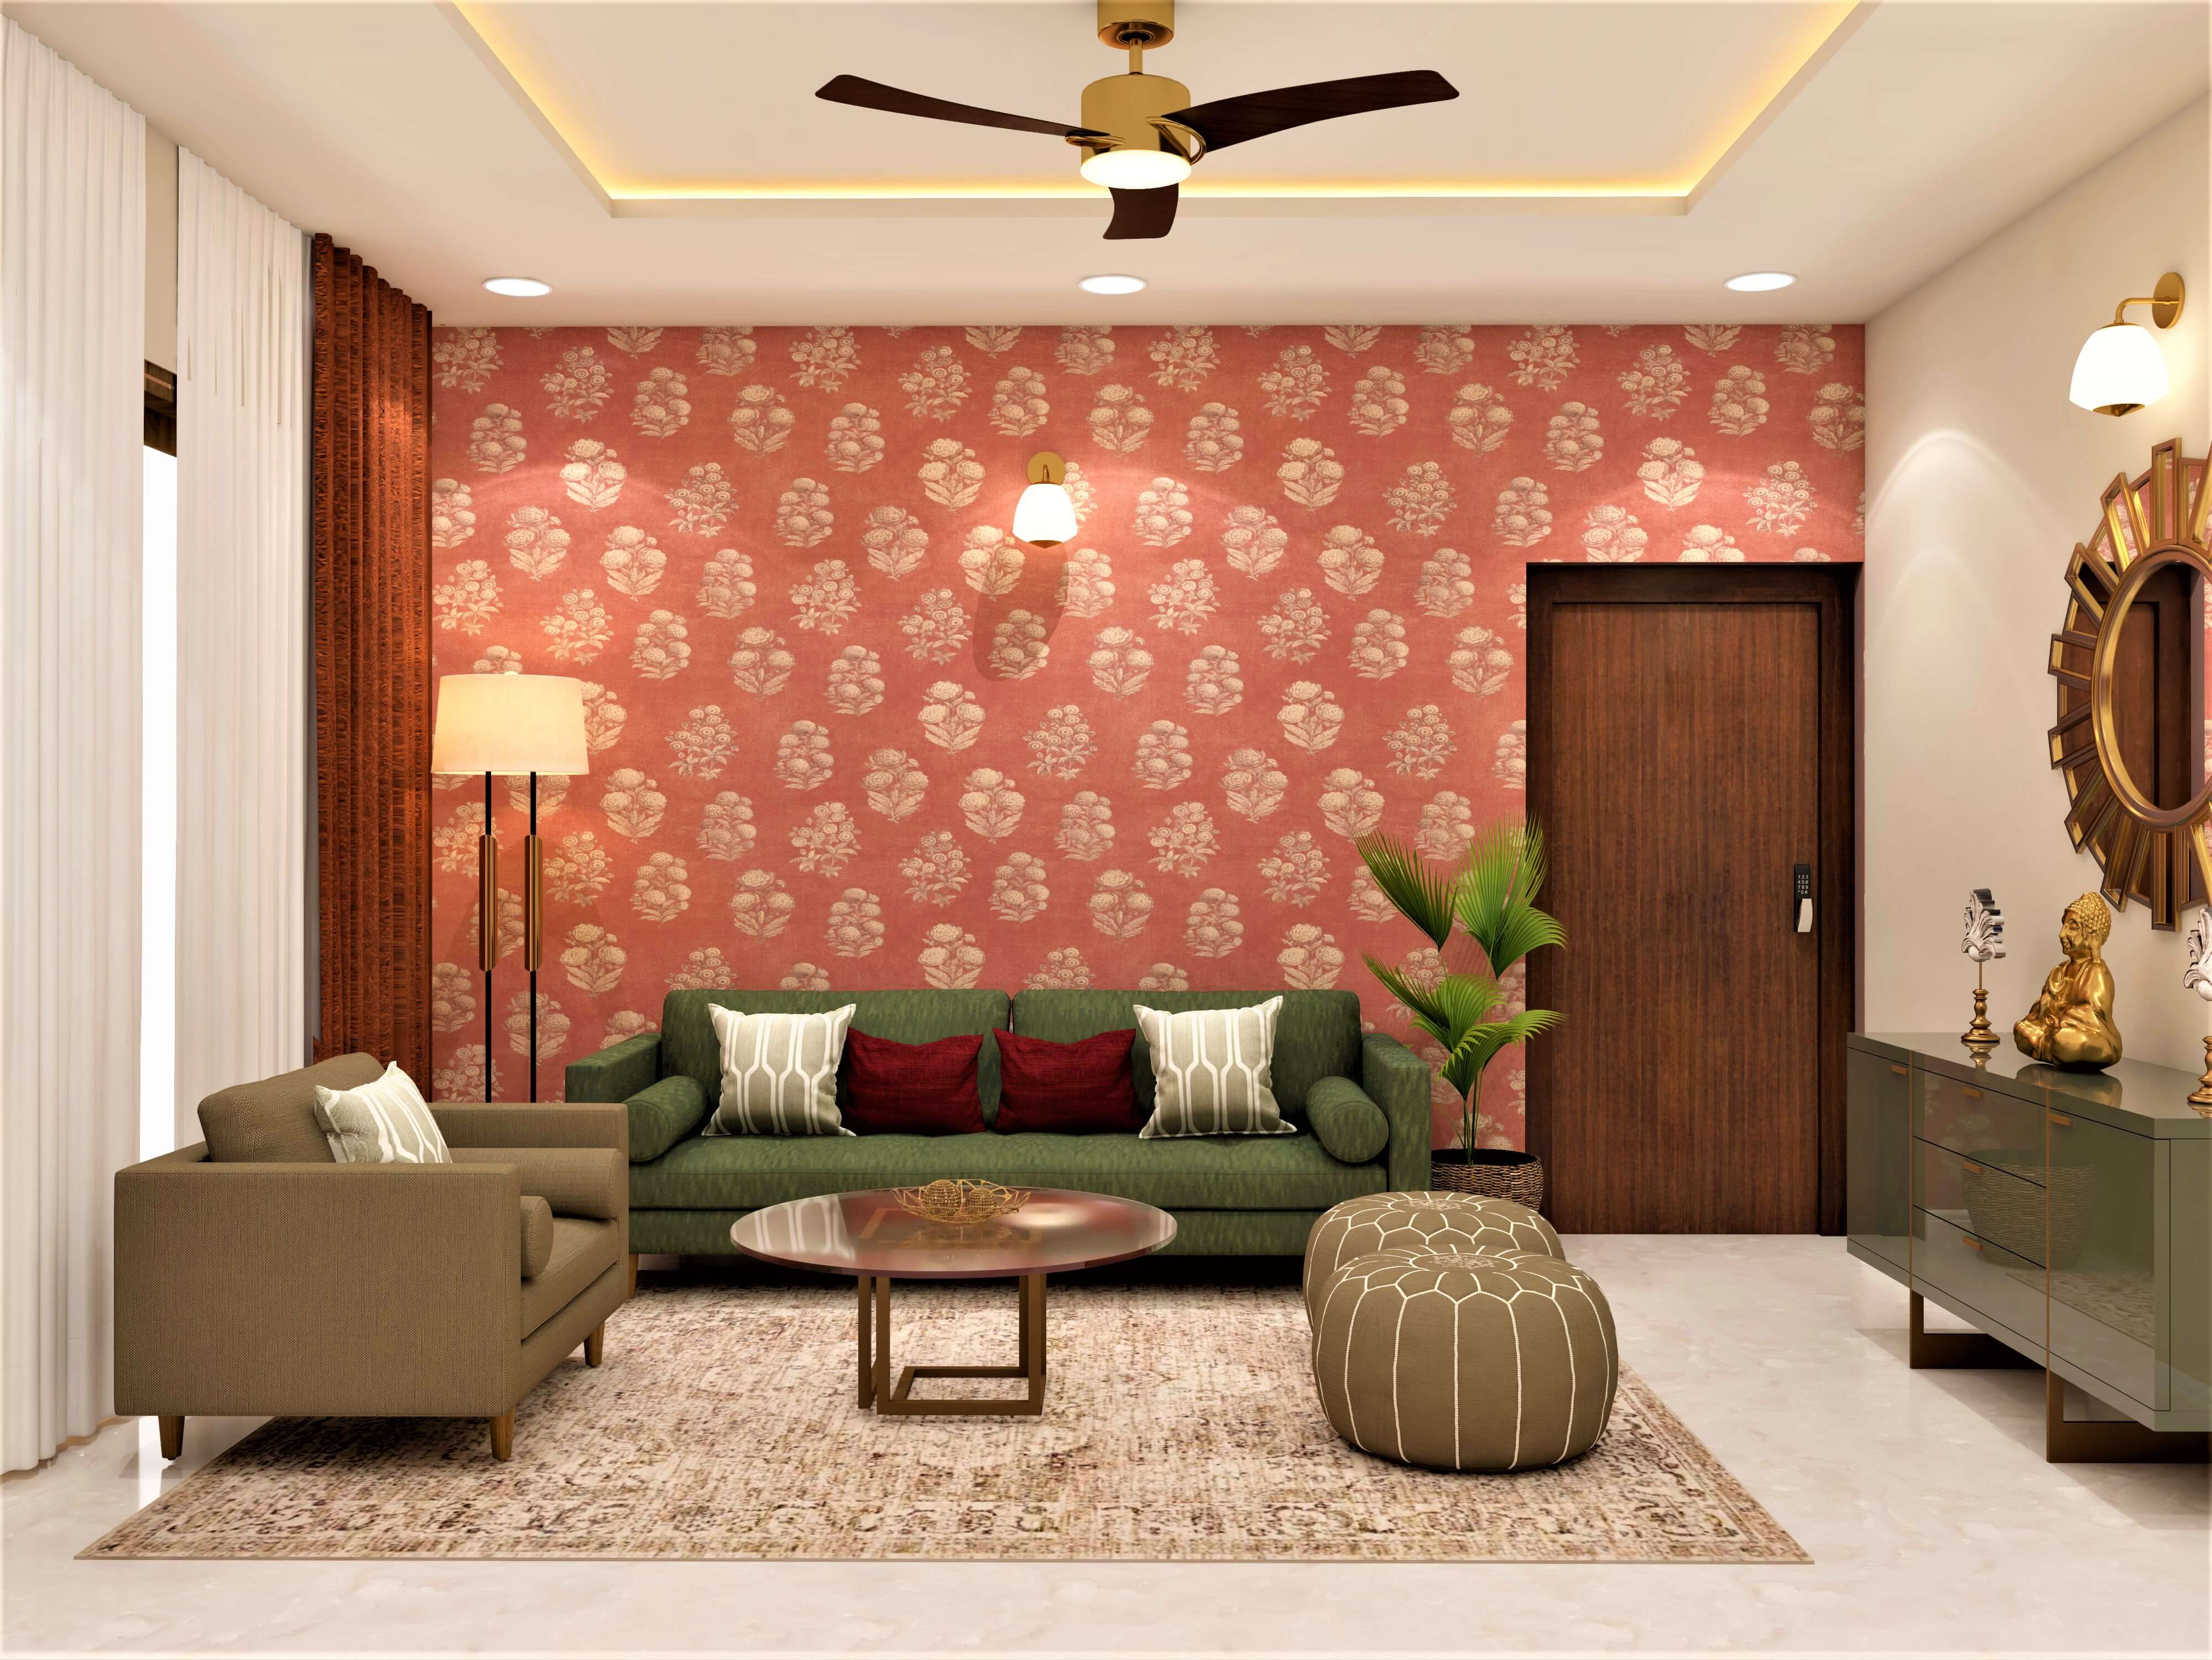 Modern living room with a vibrant patterned wallpaper - Beautiful Homes